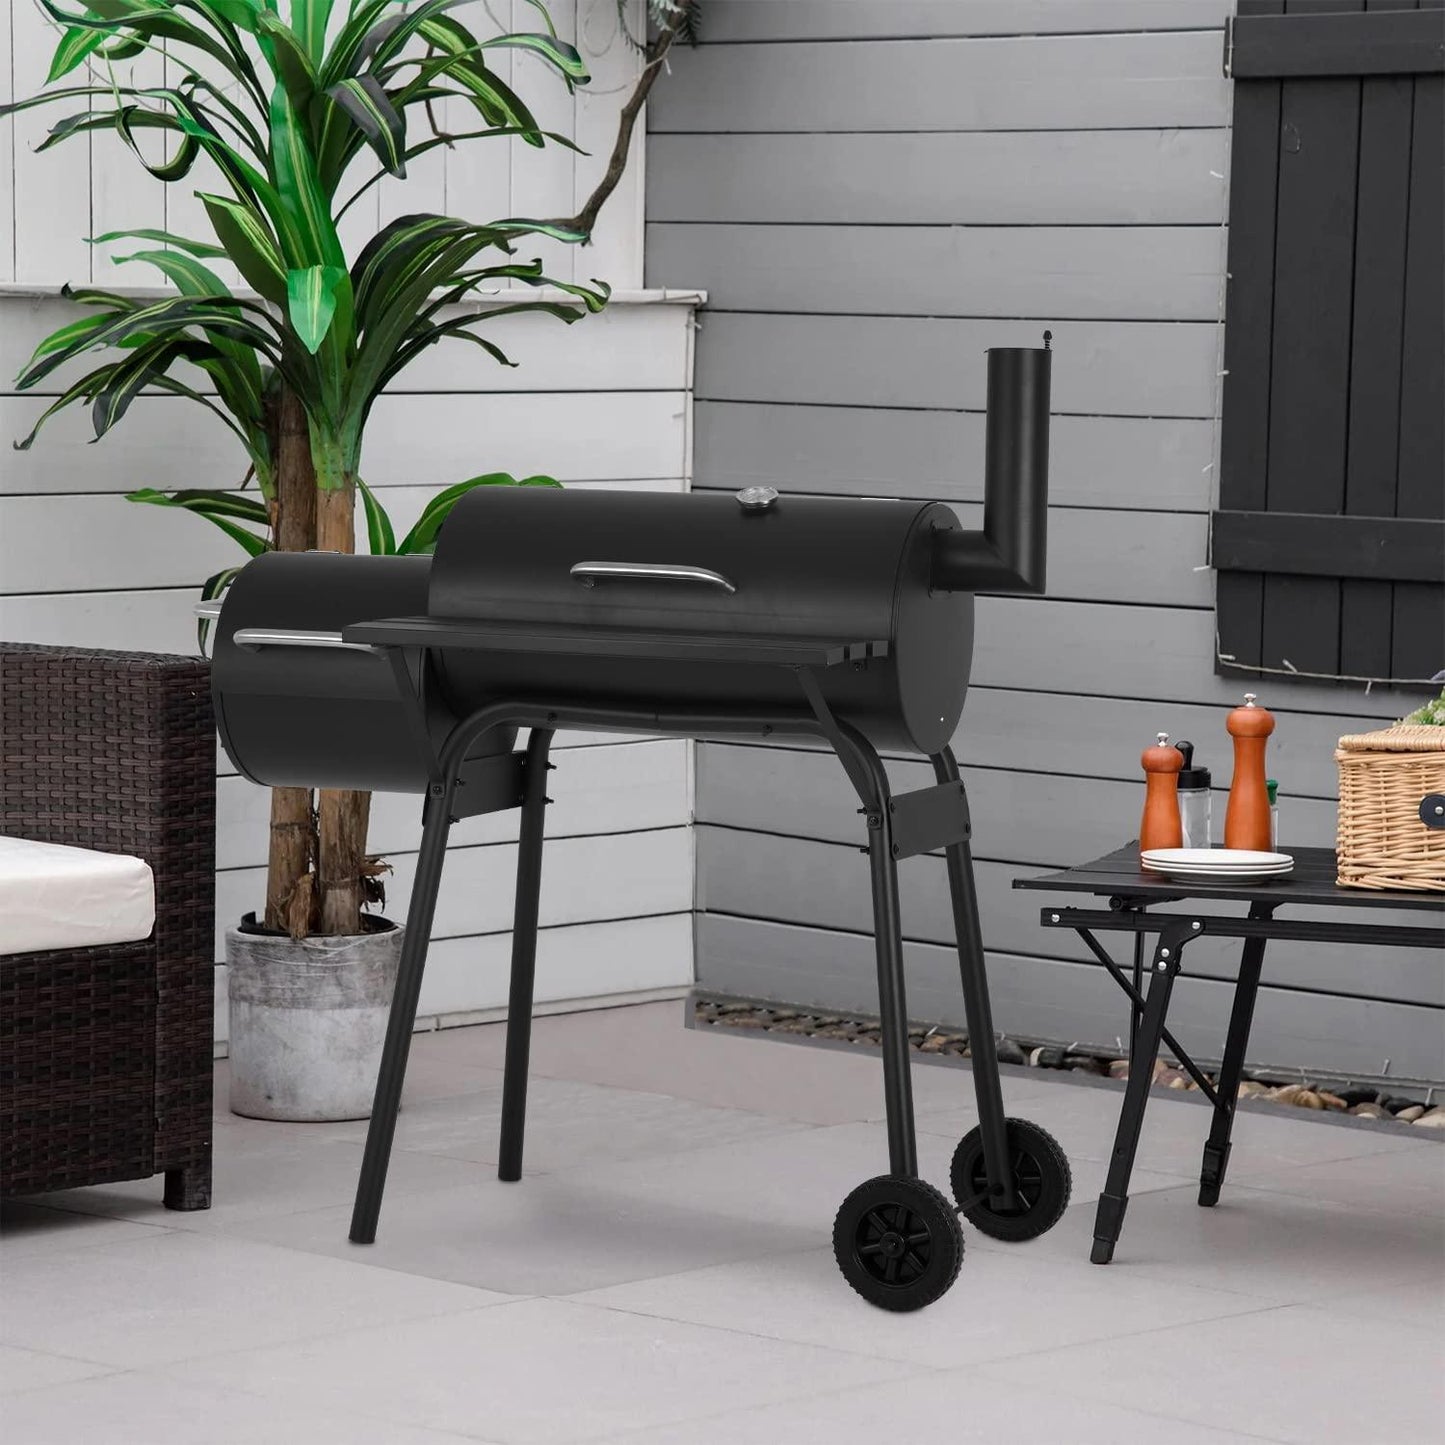 43-inch Charcoal Outdoor BBQ Grill - Portable Camping Grill for 6-10 People, Offset Smoker, Braised Roast, Patio and Backyard Picnic Grill - CookCave